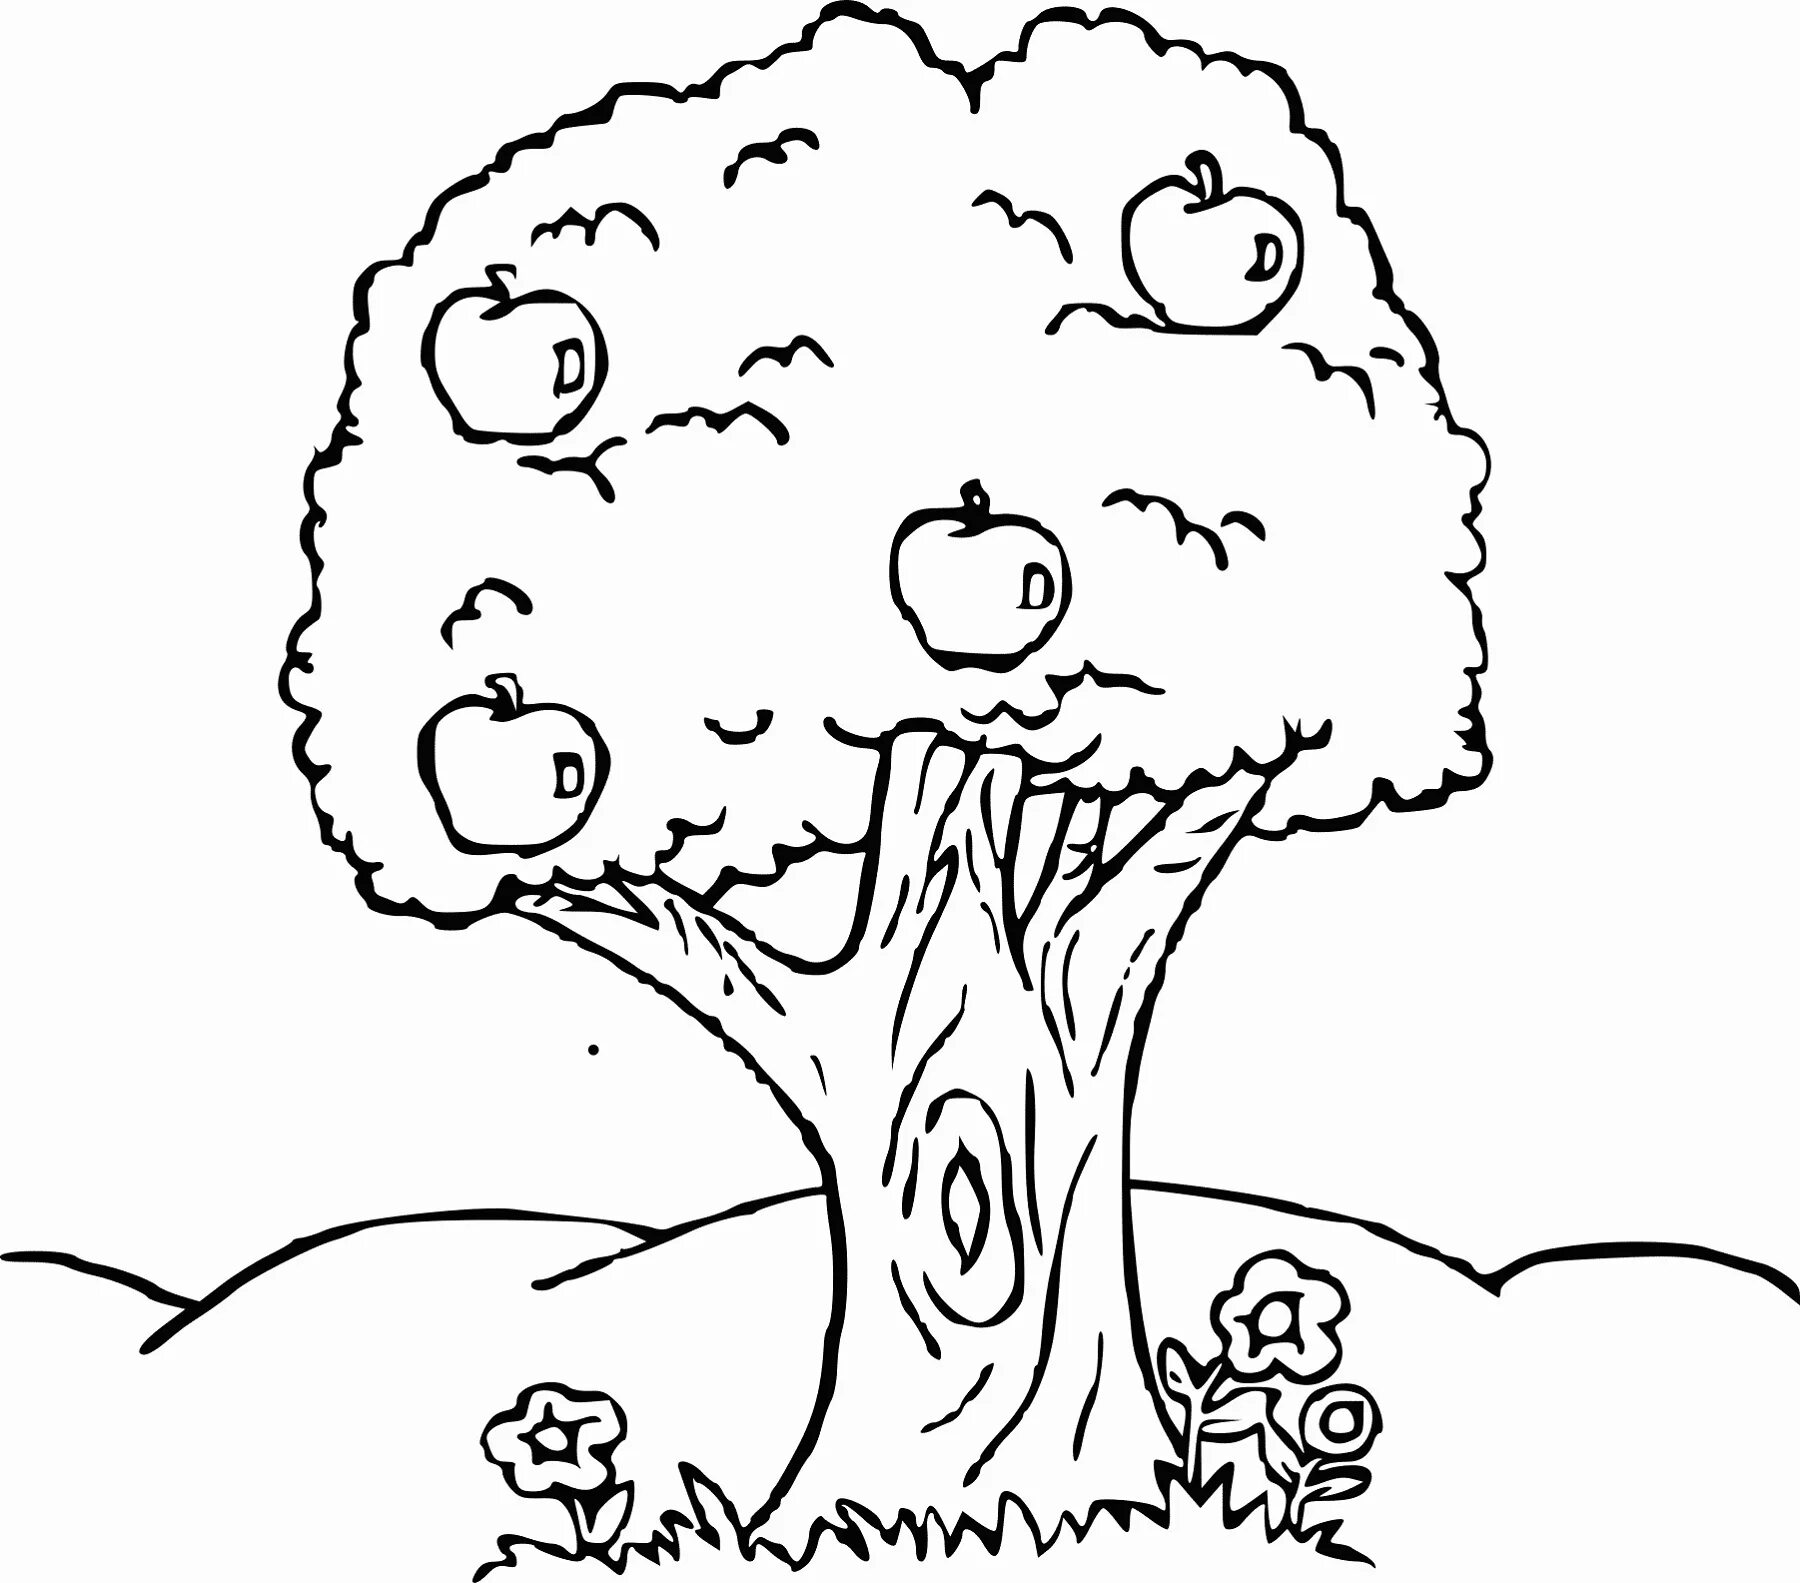 Adorable tree coloring book for 5-6 year olds